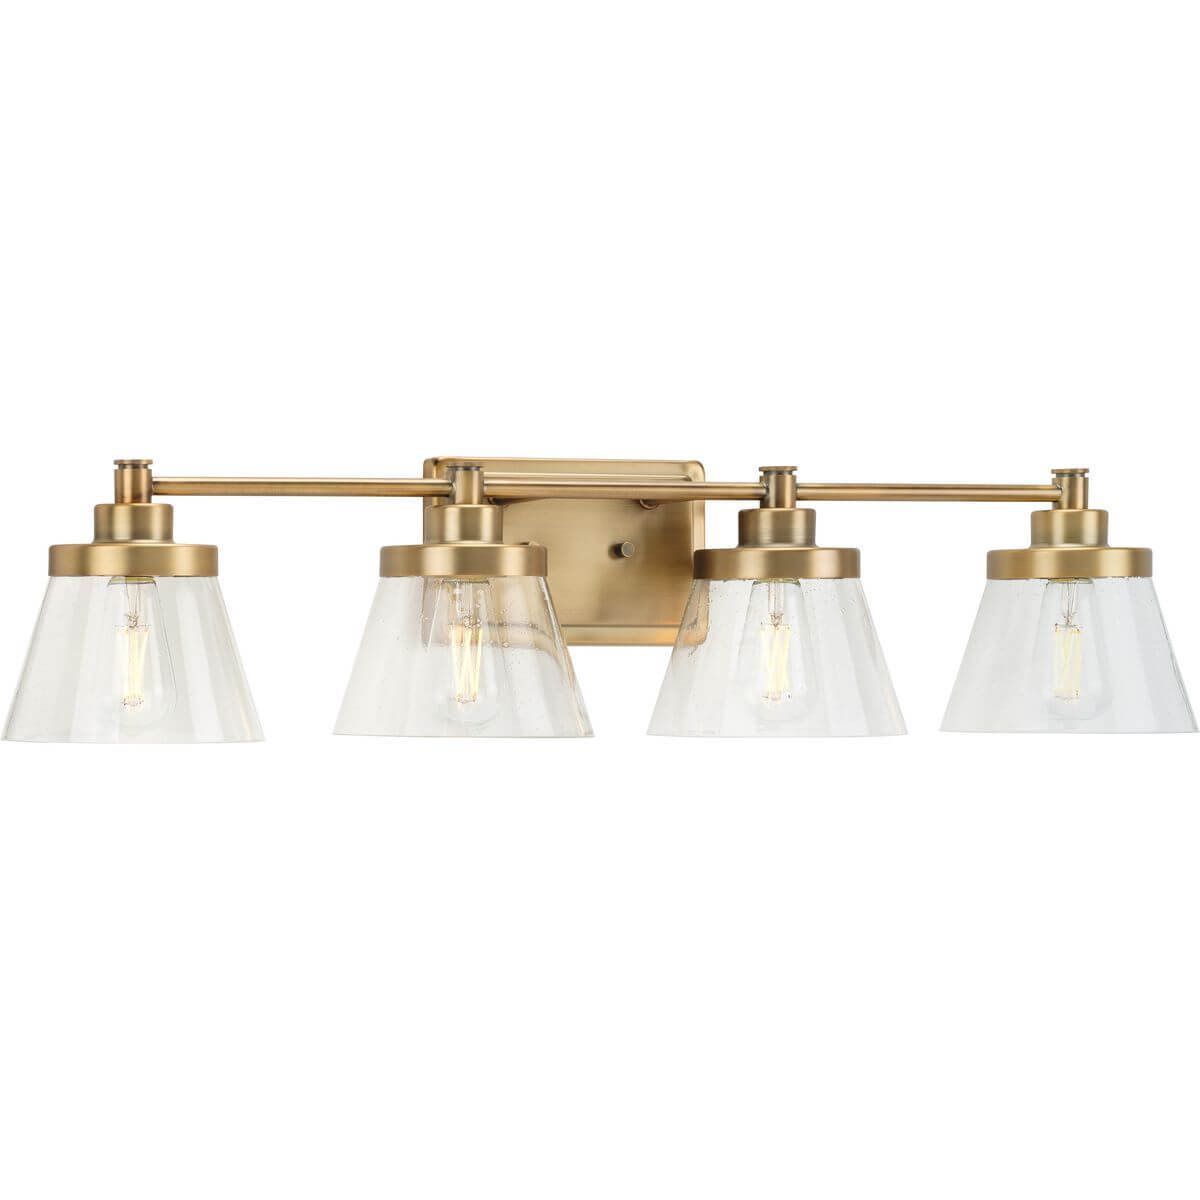 Progress Lighting Hinton 4 Light 34 inch Bath Vanity Light in Vintage Brass with Clear Seeded Glass P300351-163